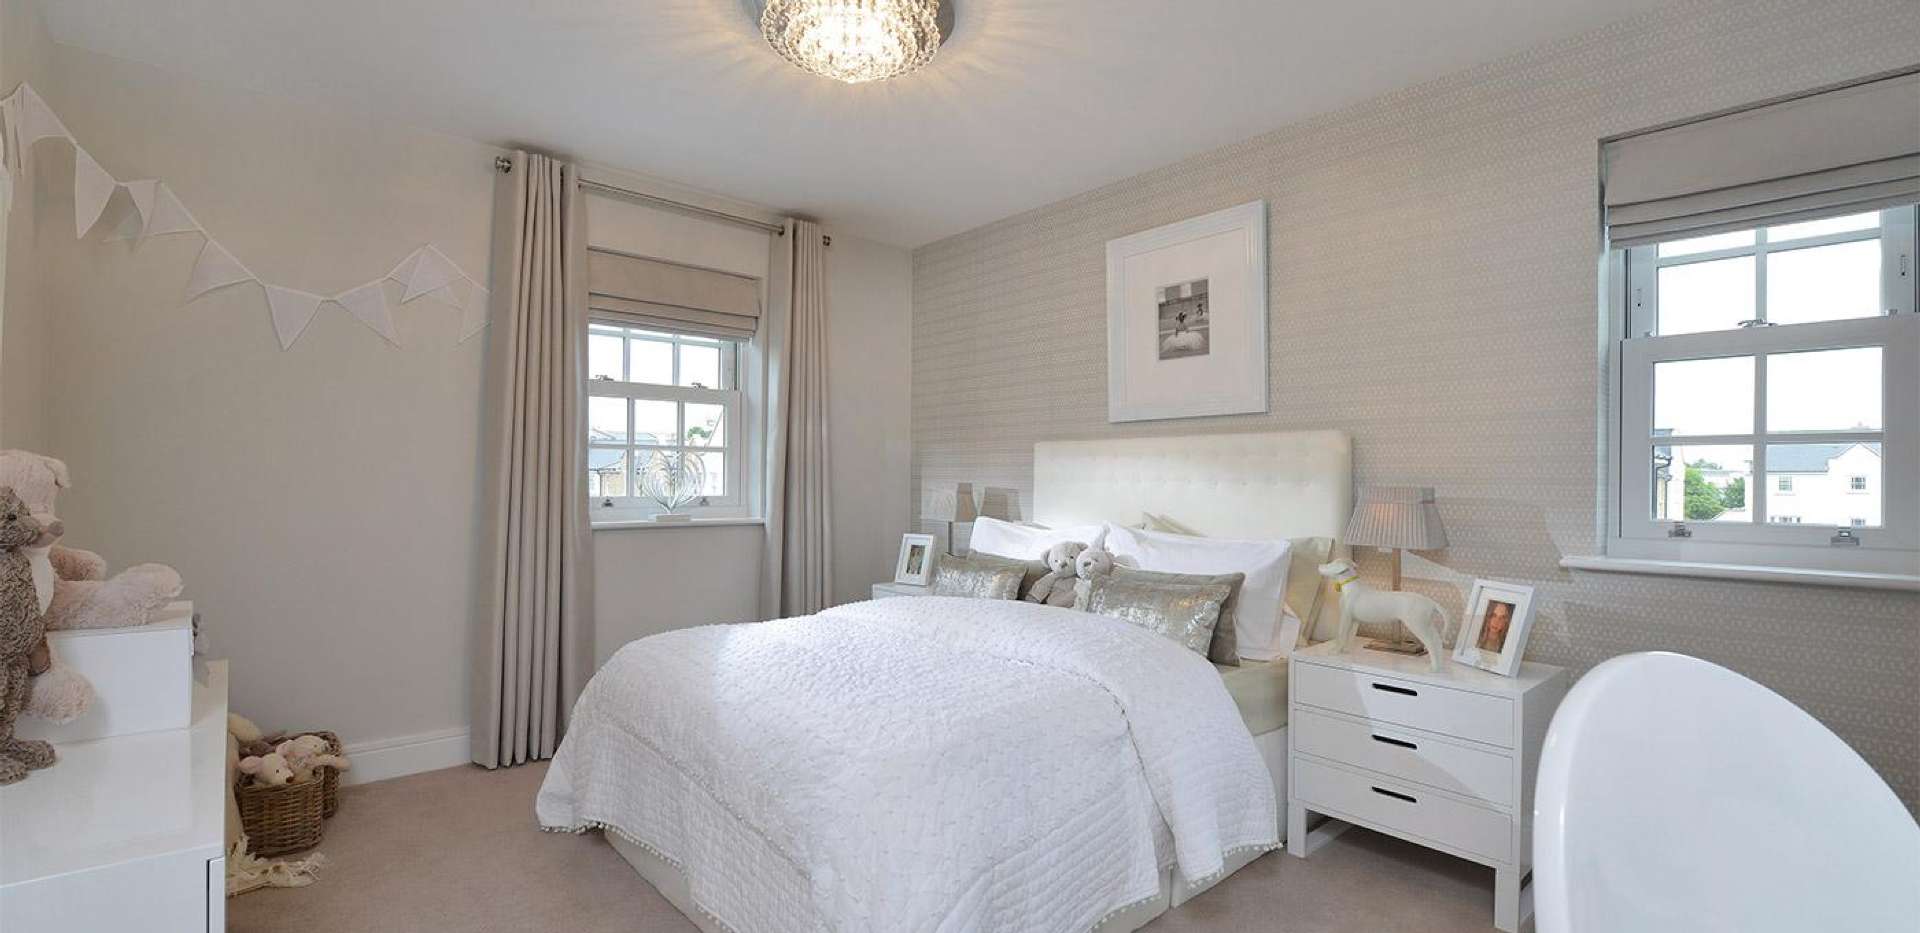 St James, Queen Mary's Place, Show Home, Bedroom, Interior